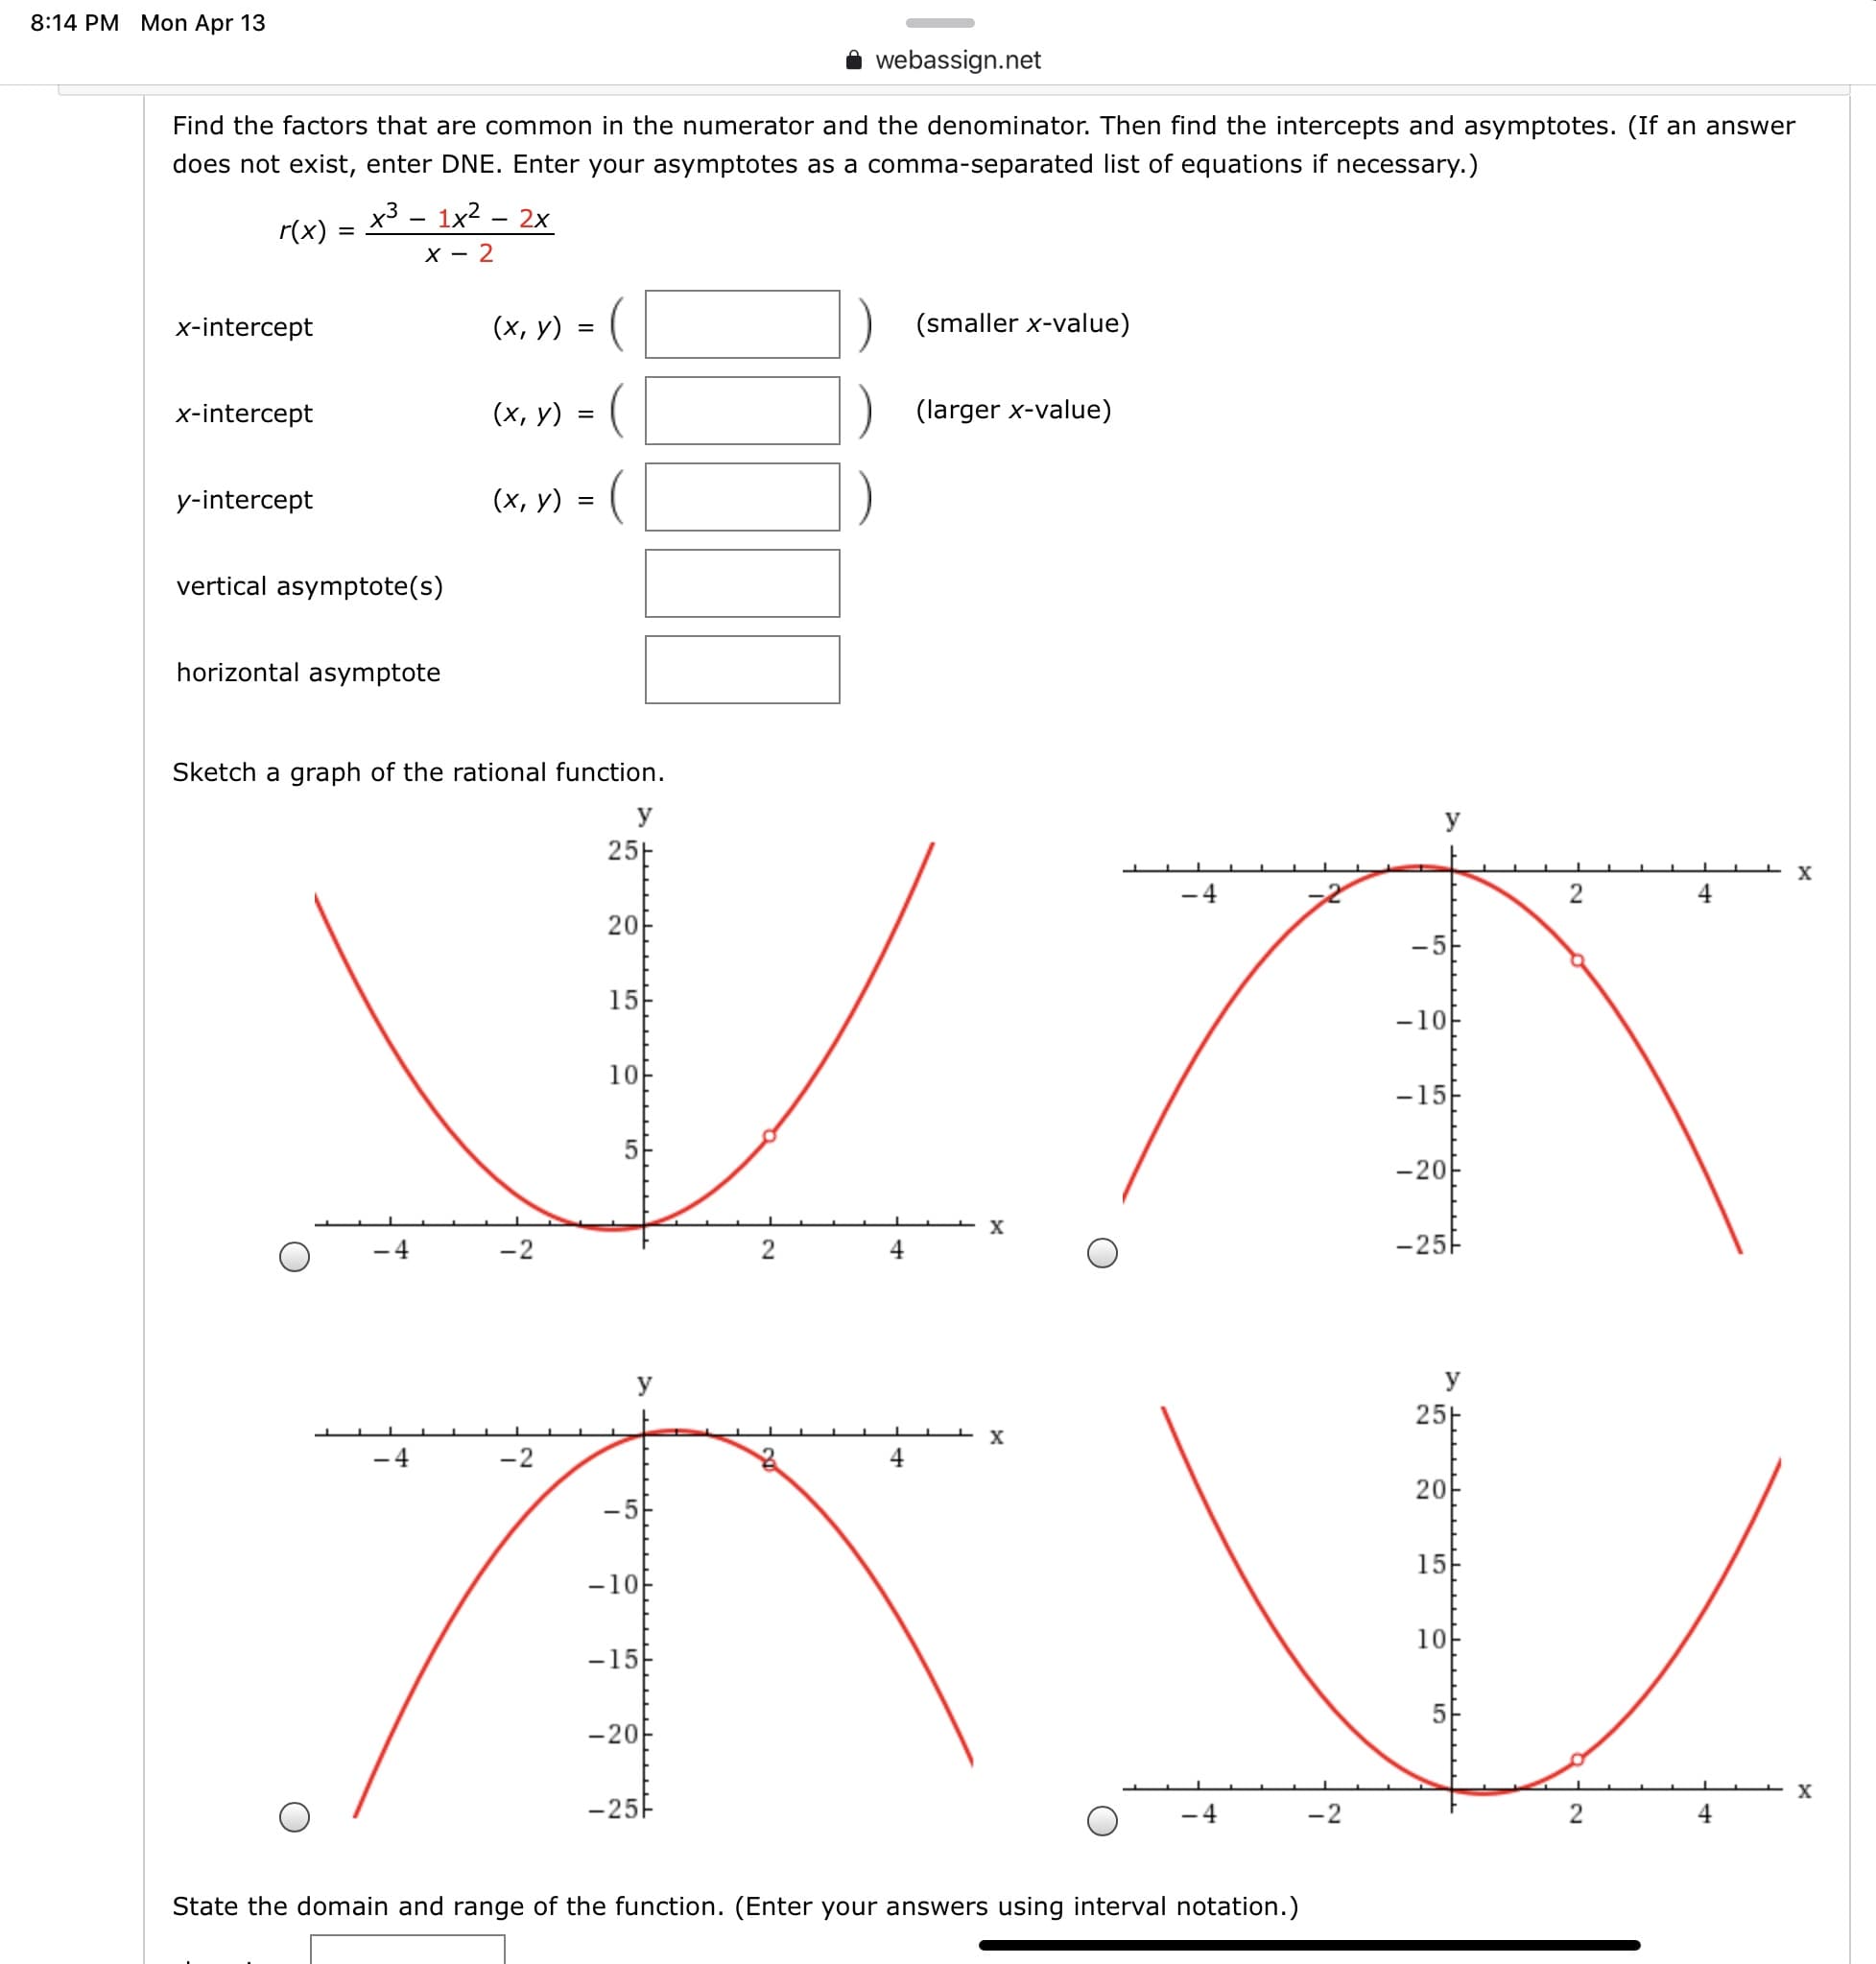 8:14 PM Mon Apr 13
webassign.net
Find the factors that are common in the numerator and the denominator. Then find the intercepts and asymptotes. (If an answer
does not exist, enter DNE. Enter your asymptotes as a comma-separated list of equations if necessary.)
х3 — 1x2 - 2х
r(x)
x-intercept
(х, у) %3D (
(smaller x-value)
x-intercept
(x, y) = (
(larger x-value)
y-intercept
(x, y) = (
vertical asymptote(s)
horizontal asymptote
Sketch a graph of the rational function.
У
У
25-
-4
4
20
-5
15
-10
10
-15F
-20
х
-4
-2
2
4
-25F
У
У
25E
-4
-2
4
20
- 5
15-
-10
10
-15
5
-20
х
-25F
-2
State the domain and range of the function. (Enter your answers using interval notation.)
LO
